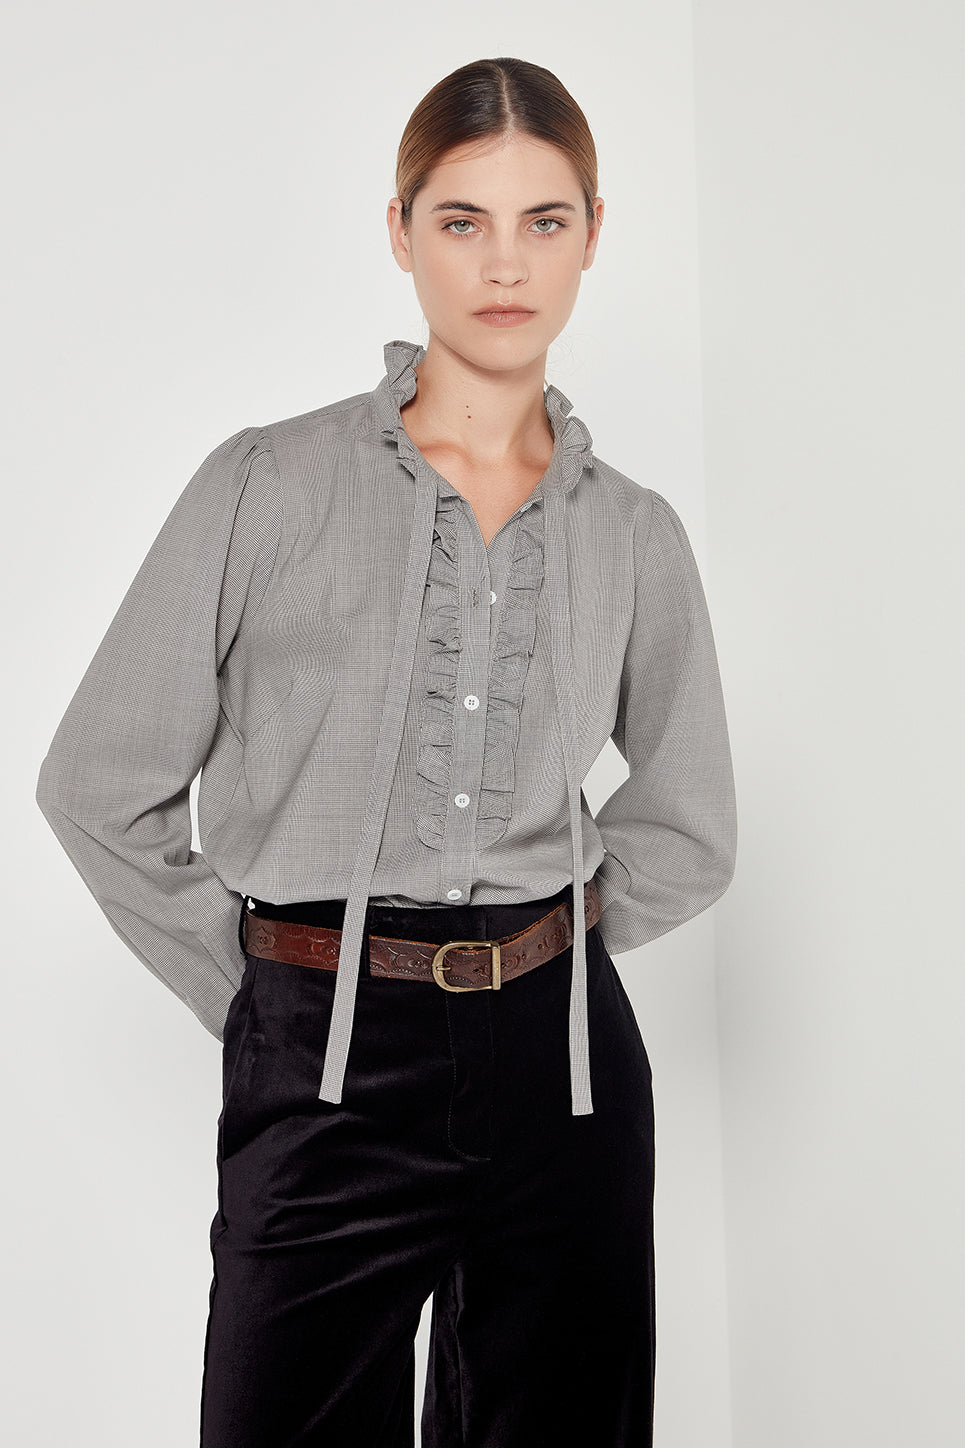 The Florence Blouse in Micro Houndstooth